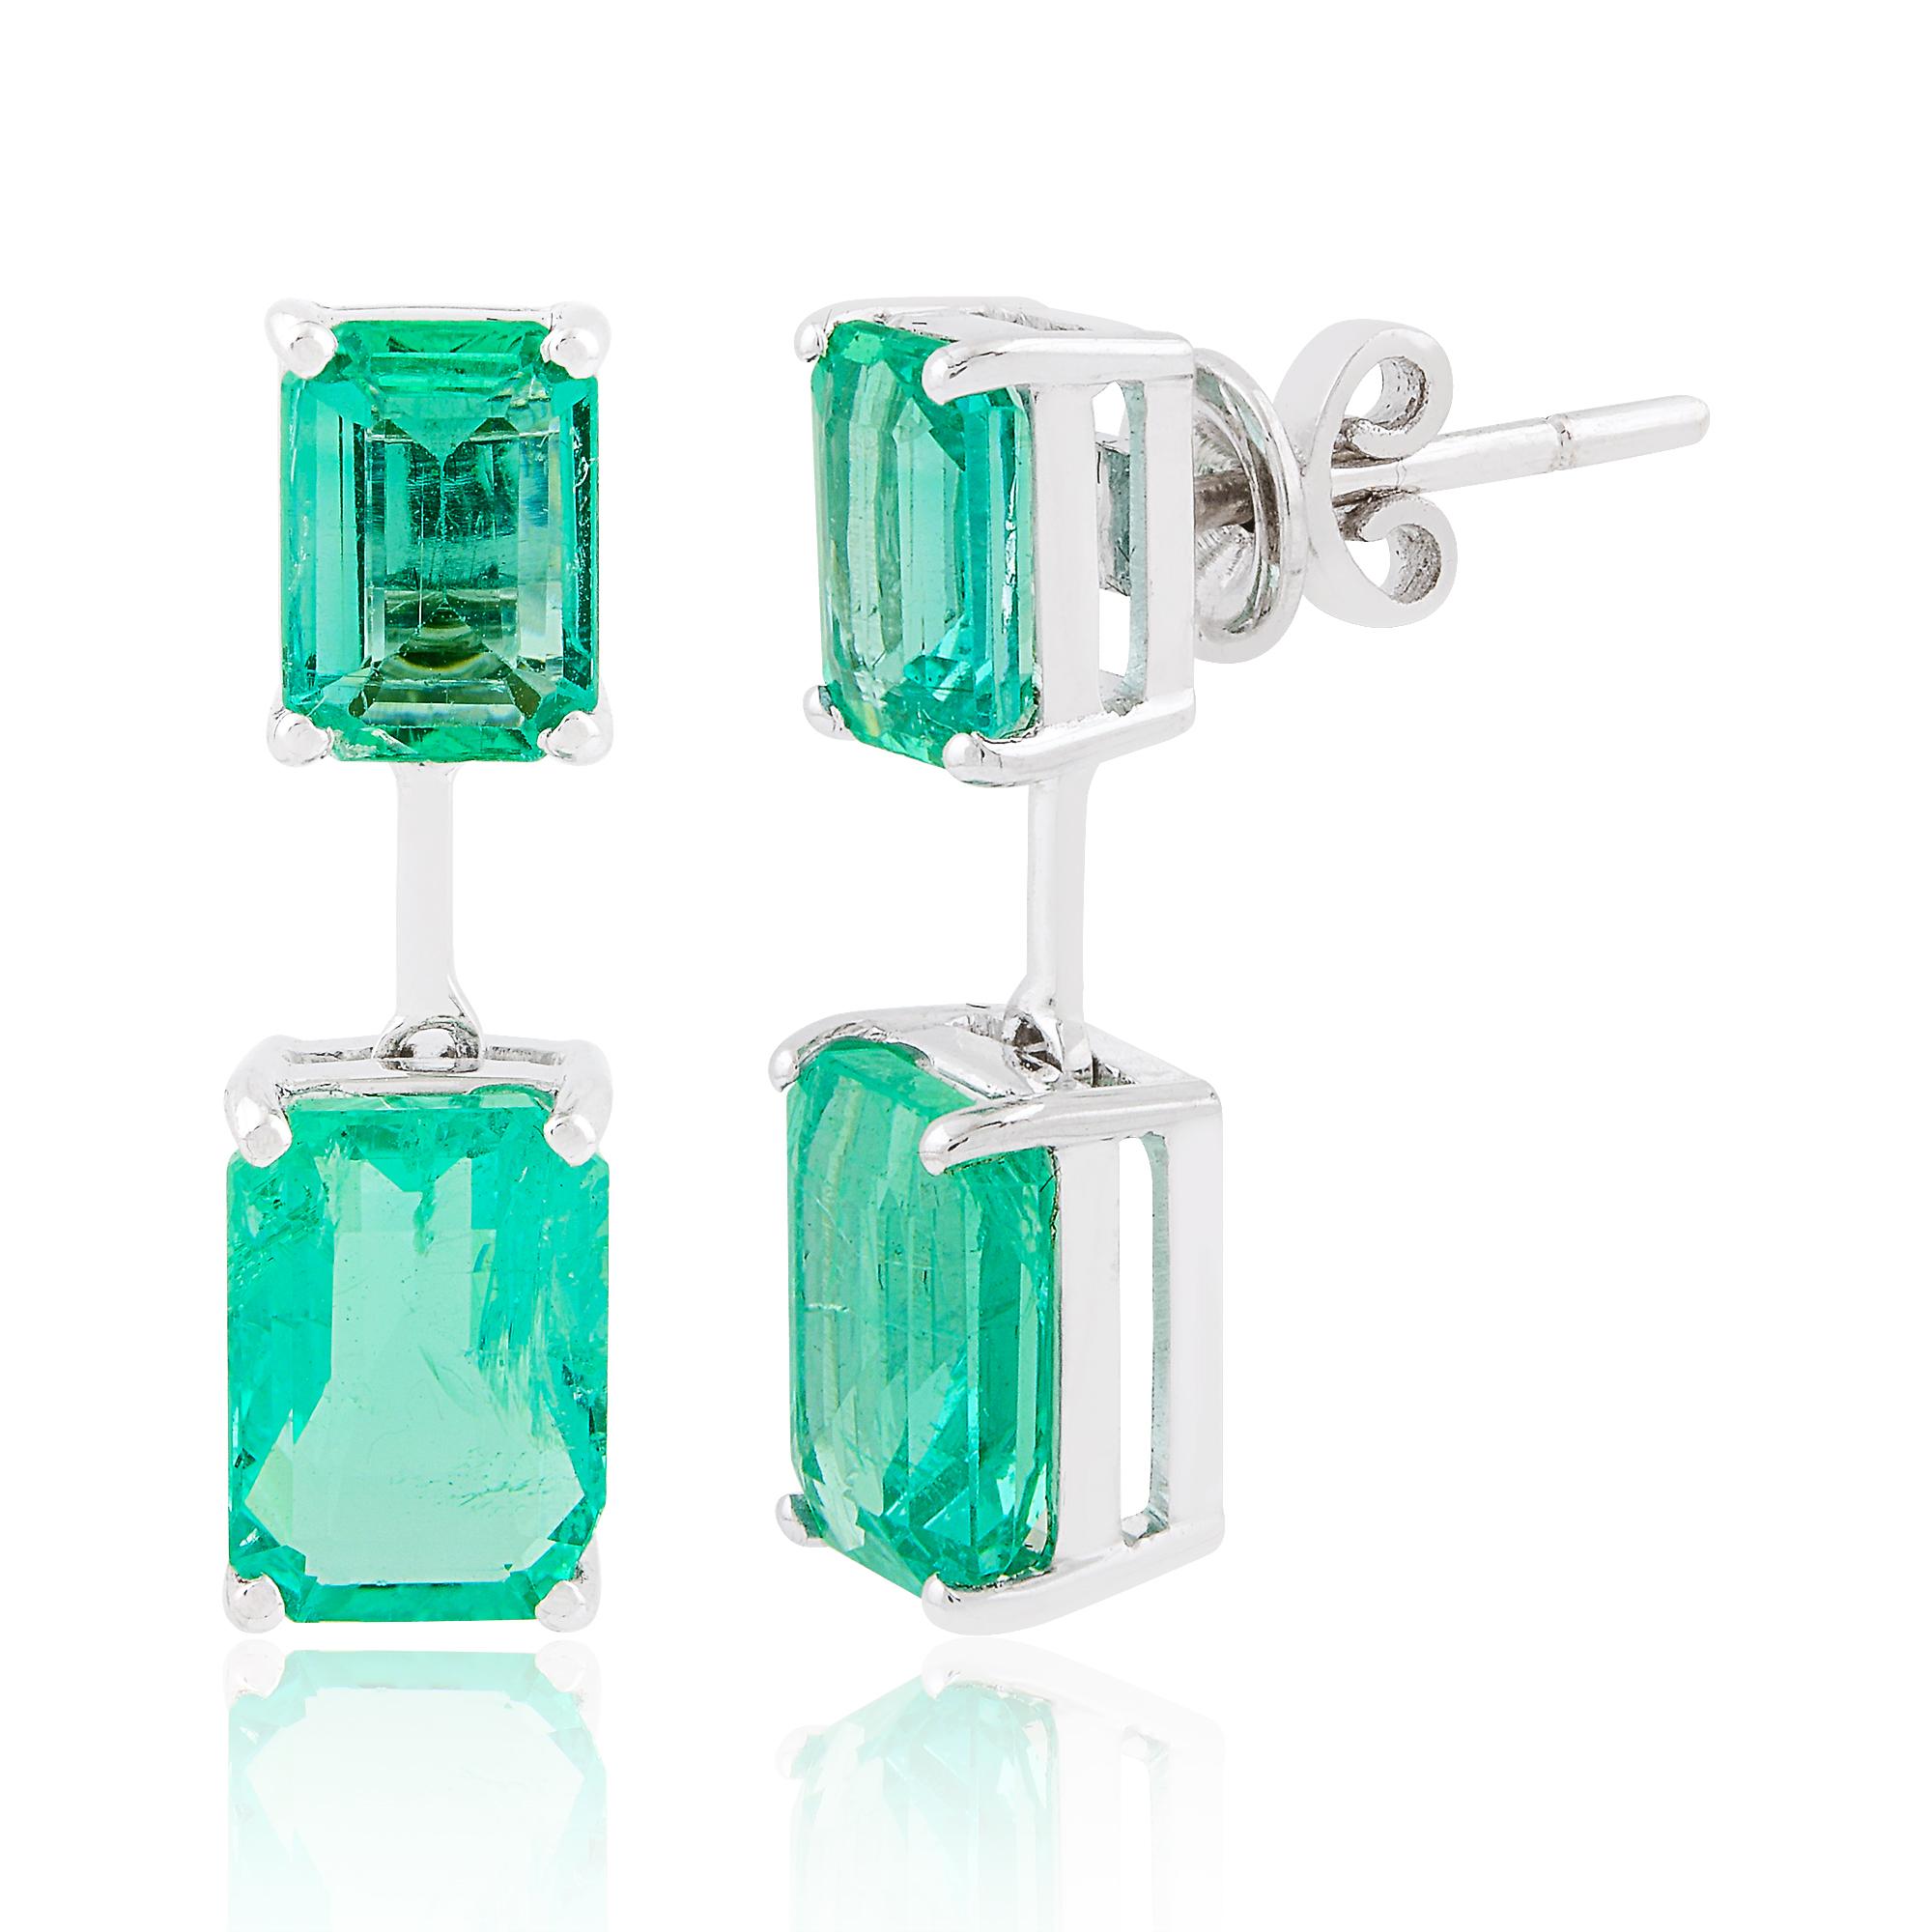 Item Code :- SEE-1777A ( SEE-1777H )
Gross Weight :- 4.82 gm
18k Solid White Gold Weight :- 3.70 gm
Natural Emerald Weight :- 5.60 ct. approx. ( as per availability )
Earrings Length :- 19 mm approx.

✦ Sizing
.....................
We can adjust